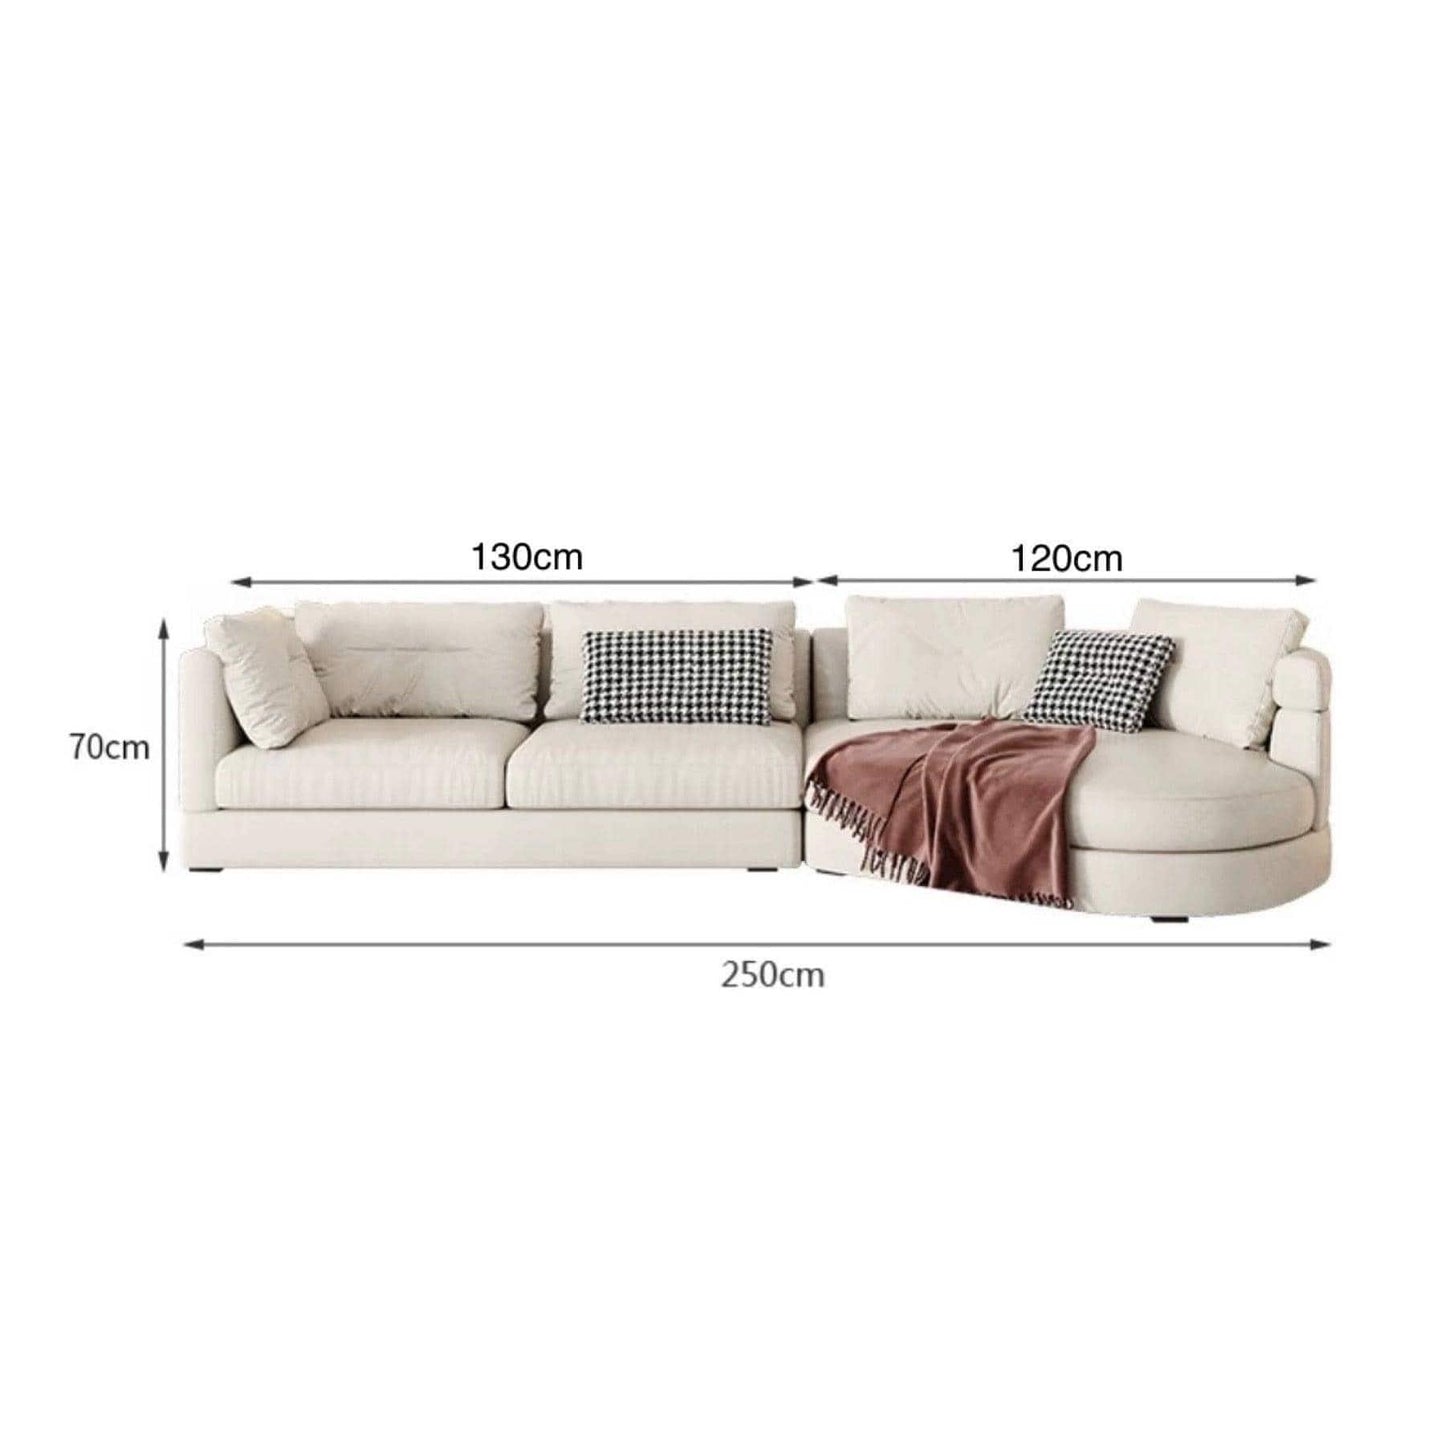 home-atelier-f31a Suede Fabric / Length 250cm with curve chaise / Khaki Baxter Designer Sectional Round Chaise Sofa